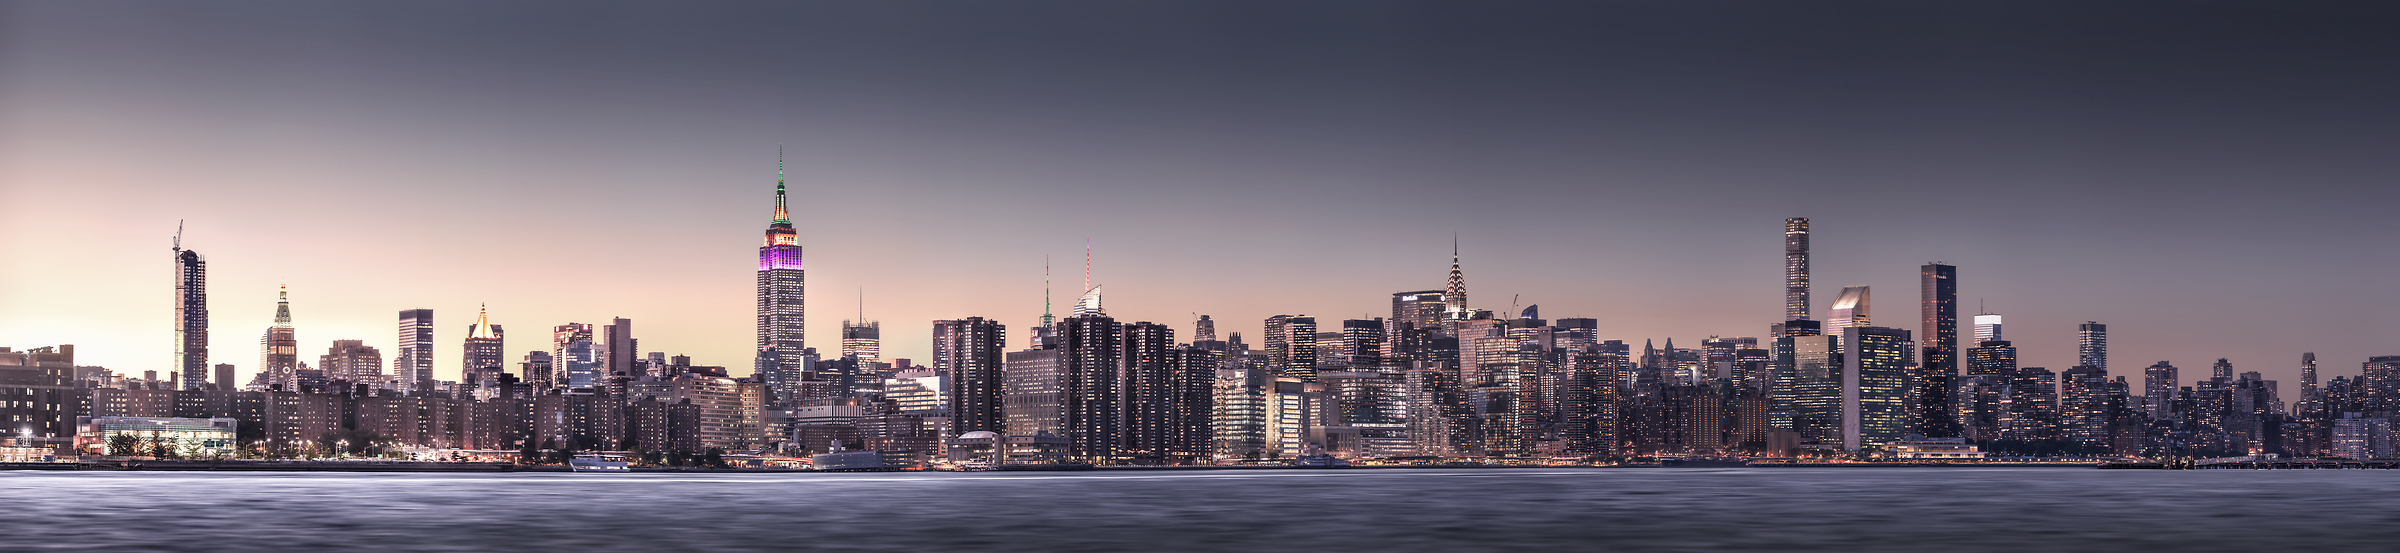 1,946 megapixels! The highest resolution cityscape VAST photo of the Midtown Manhattan city skyline in the evening sunset in New York City; created by Dan Piech.